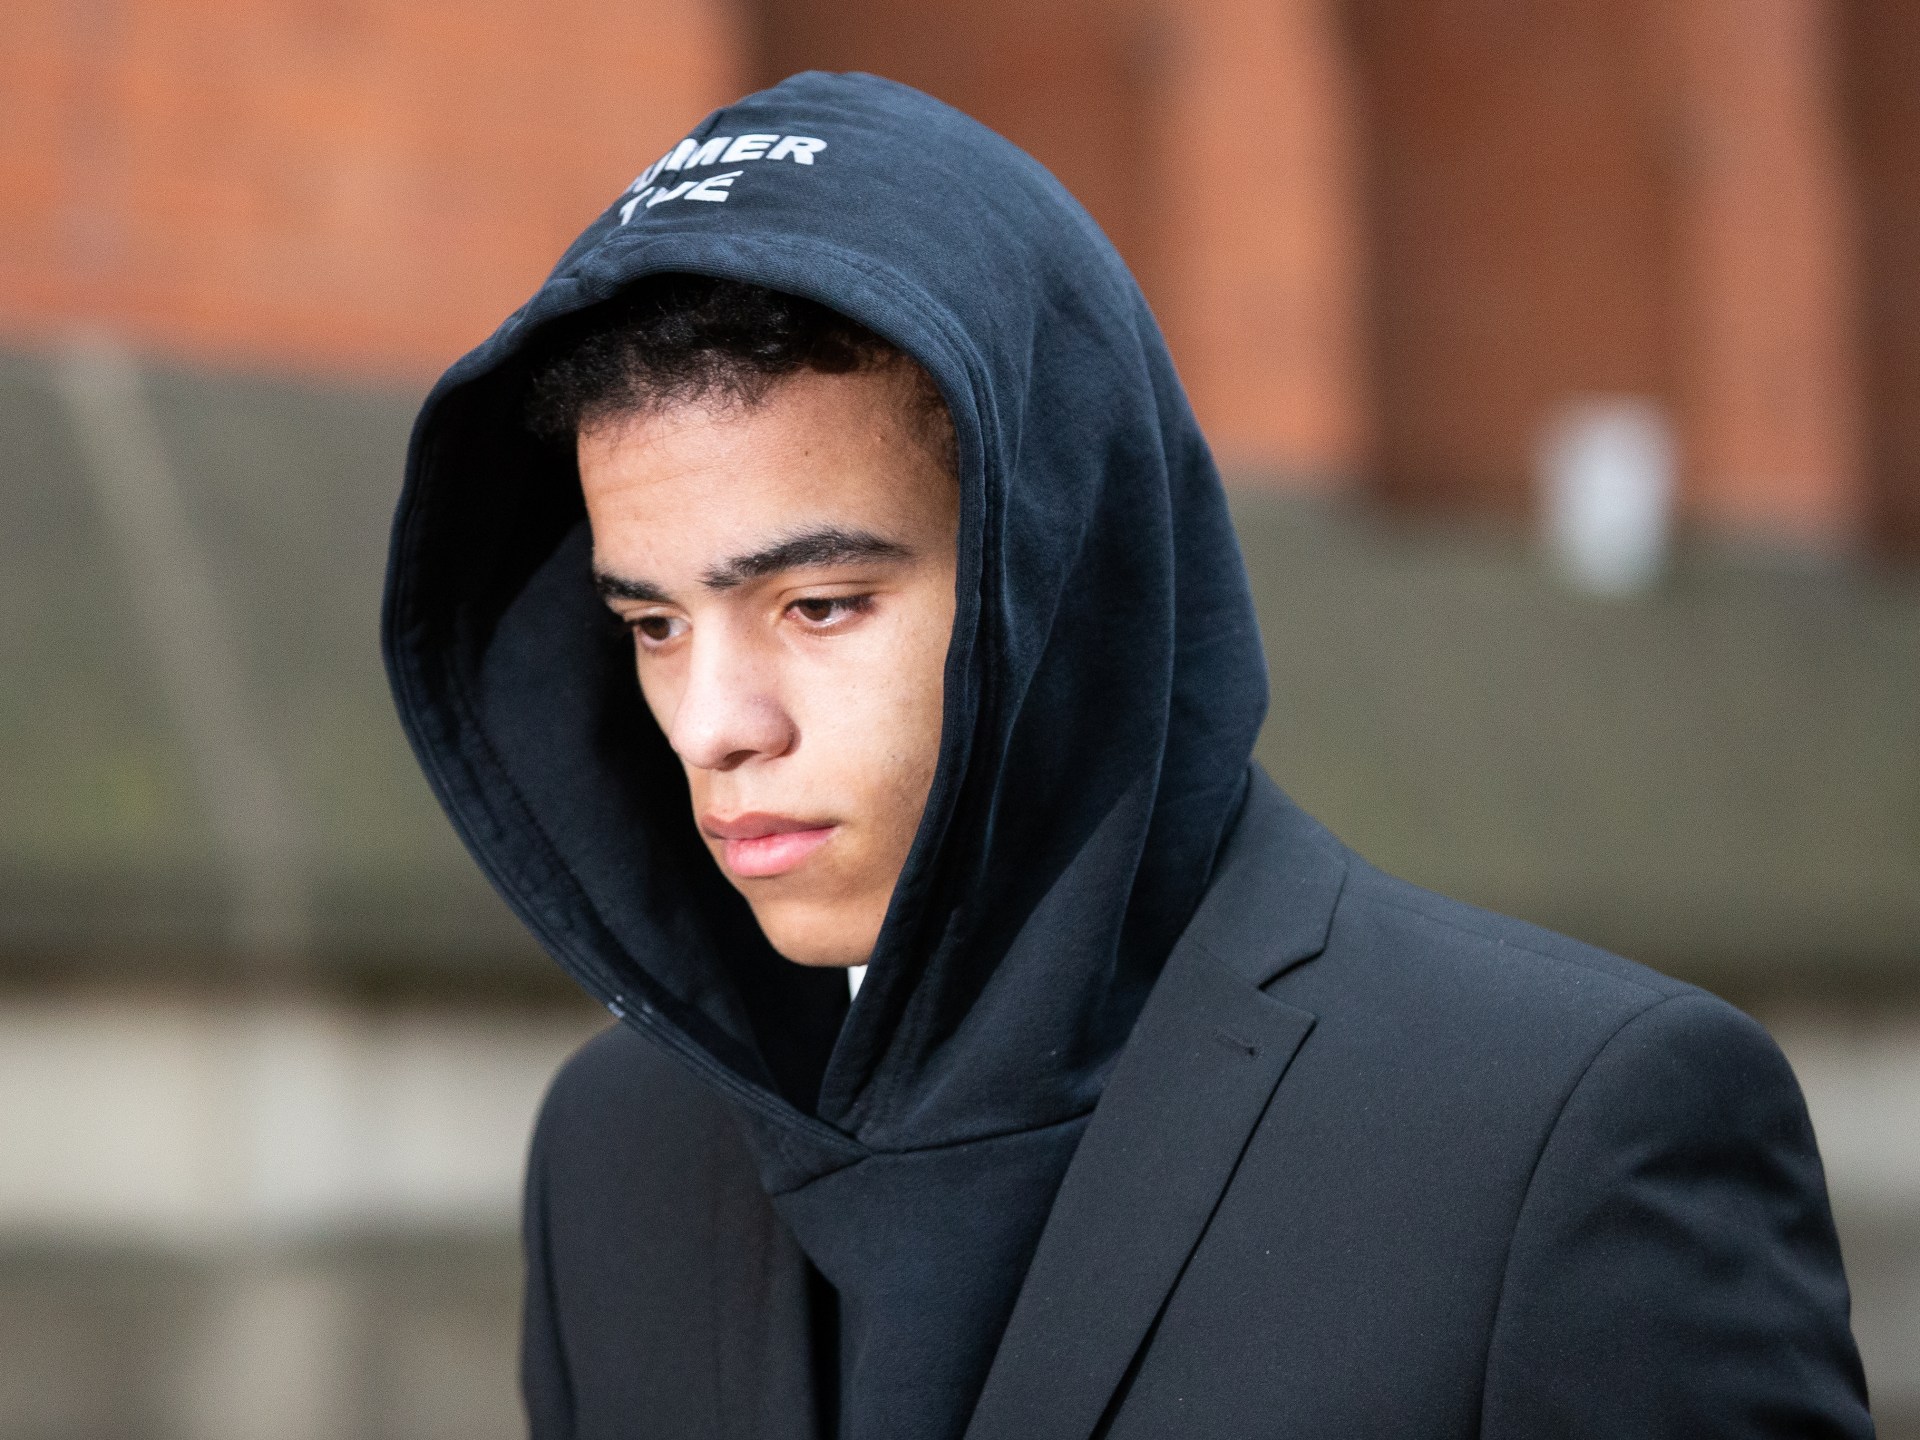 Rape cost in opposition to Man United participant Greenwood dropped